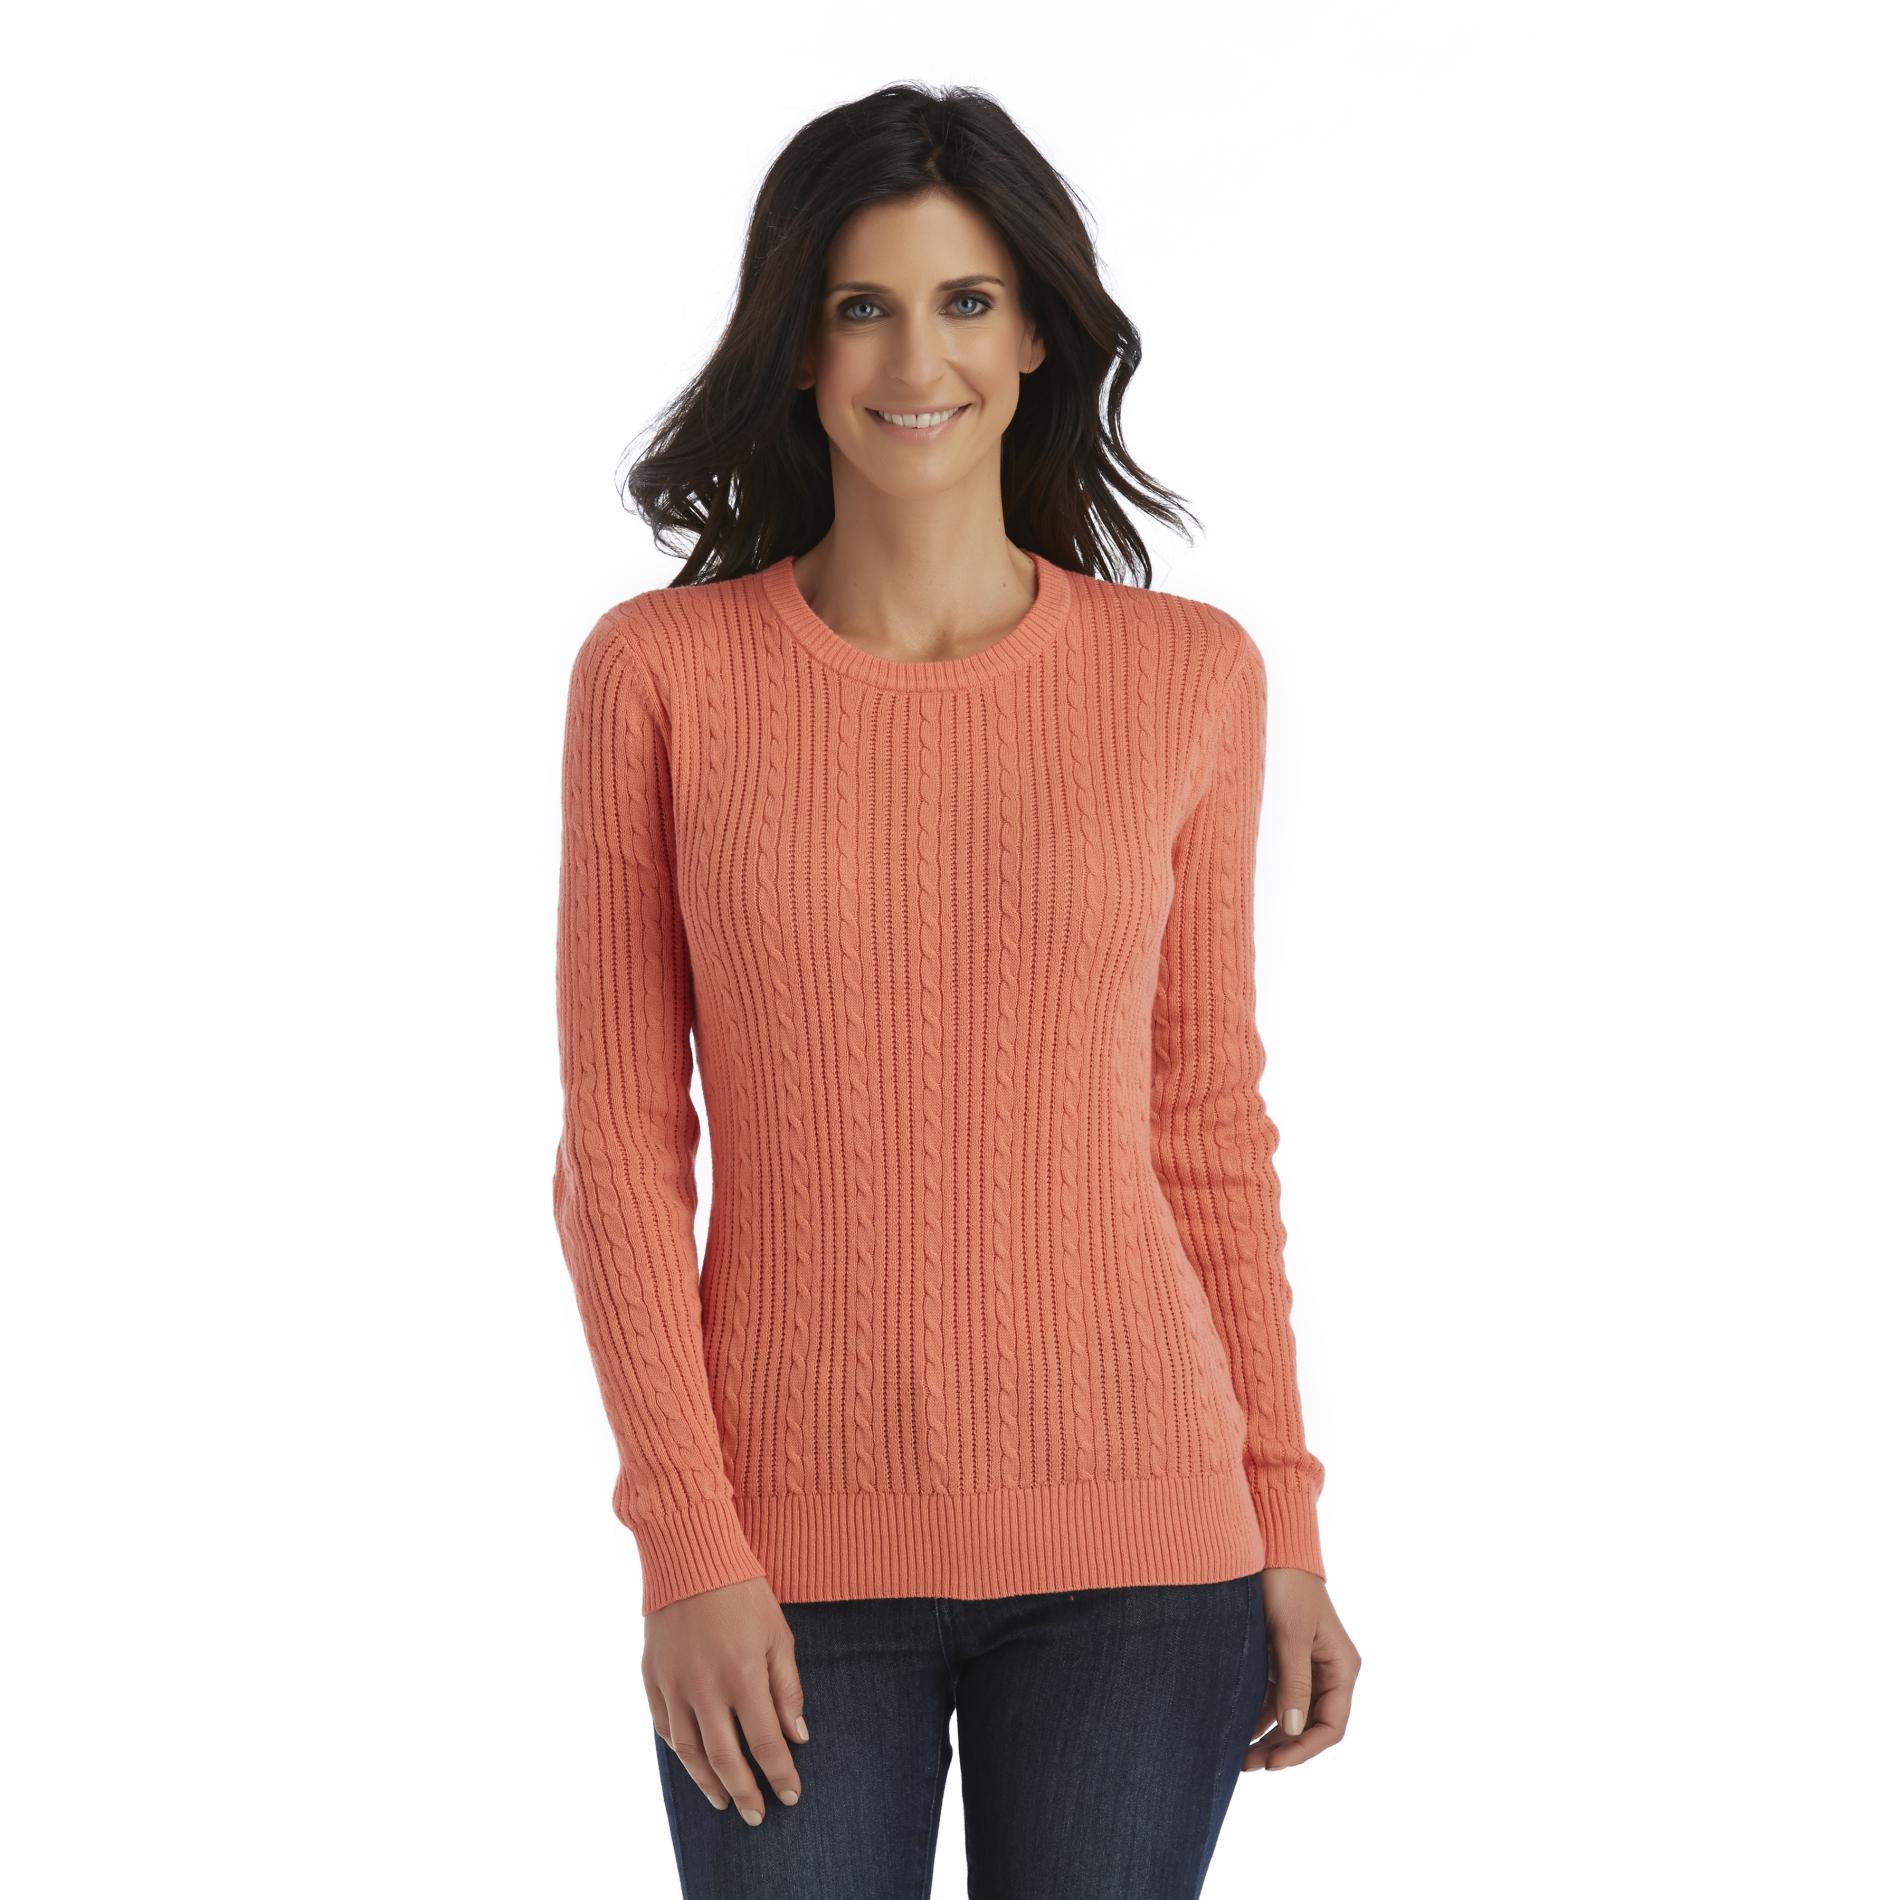 Basic Editions Women's Cable Knit Crew Neck Sweater